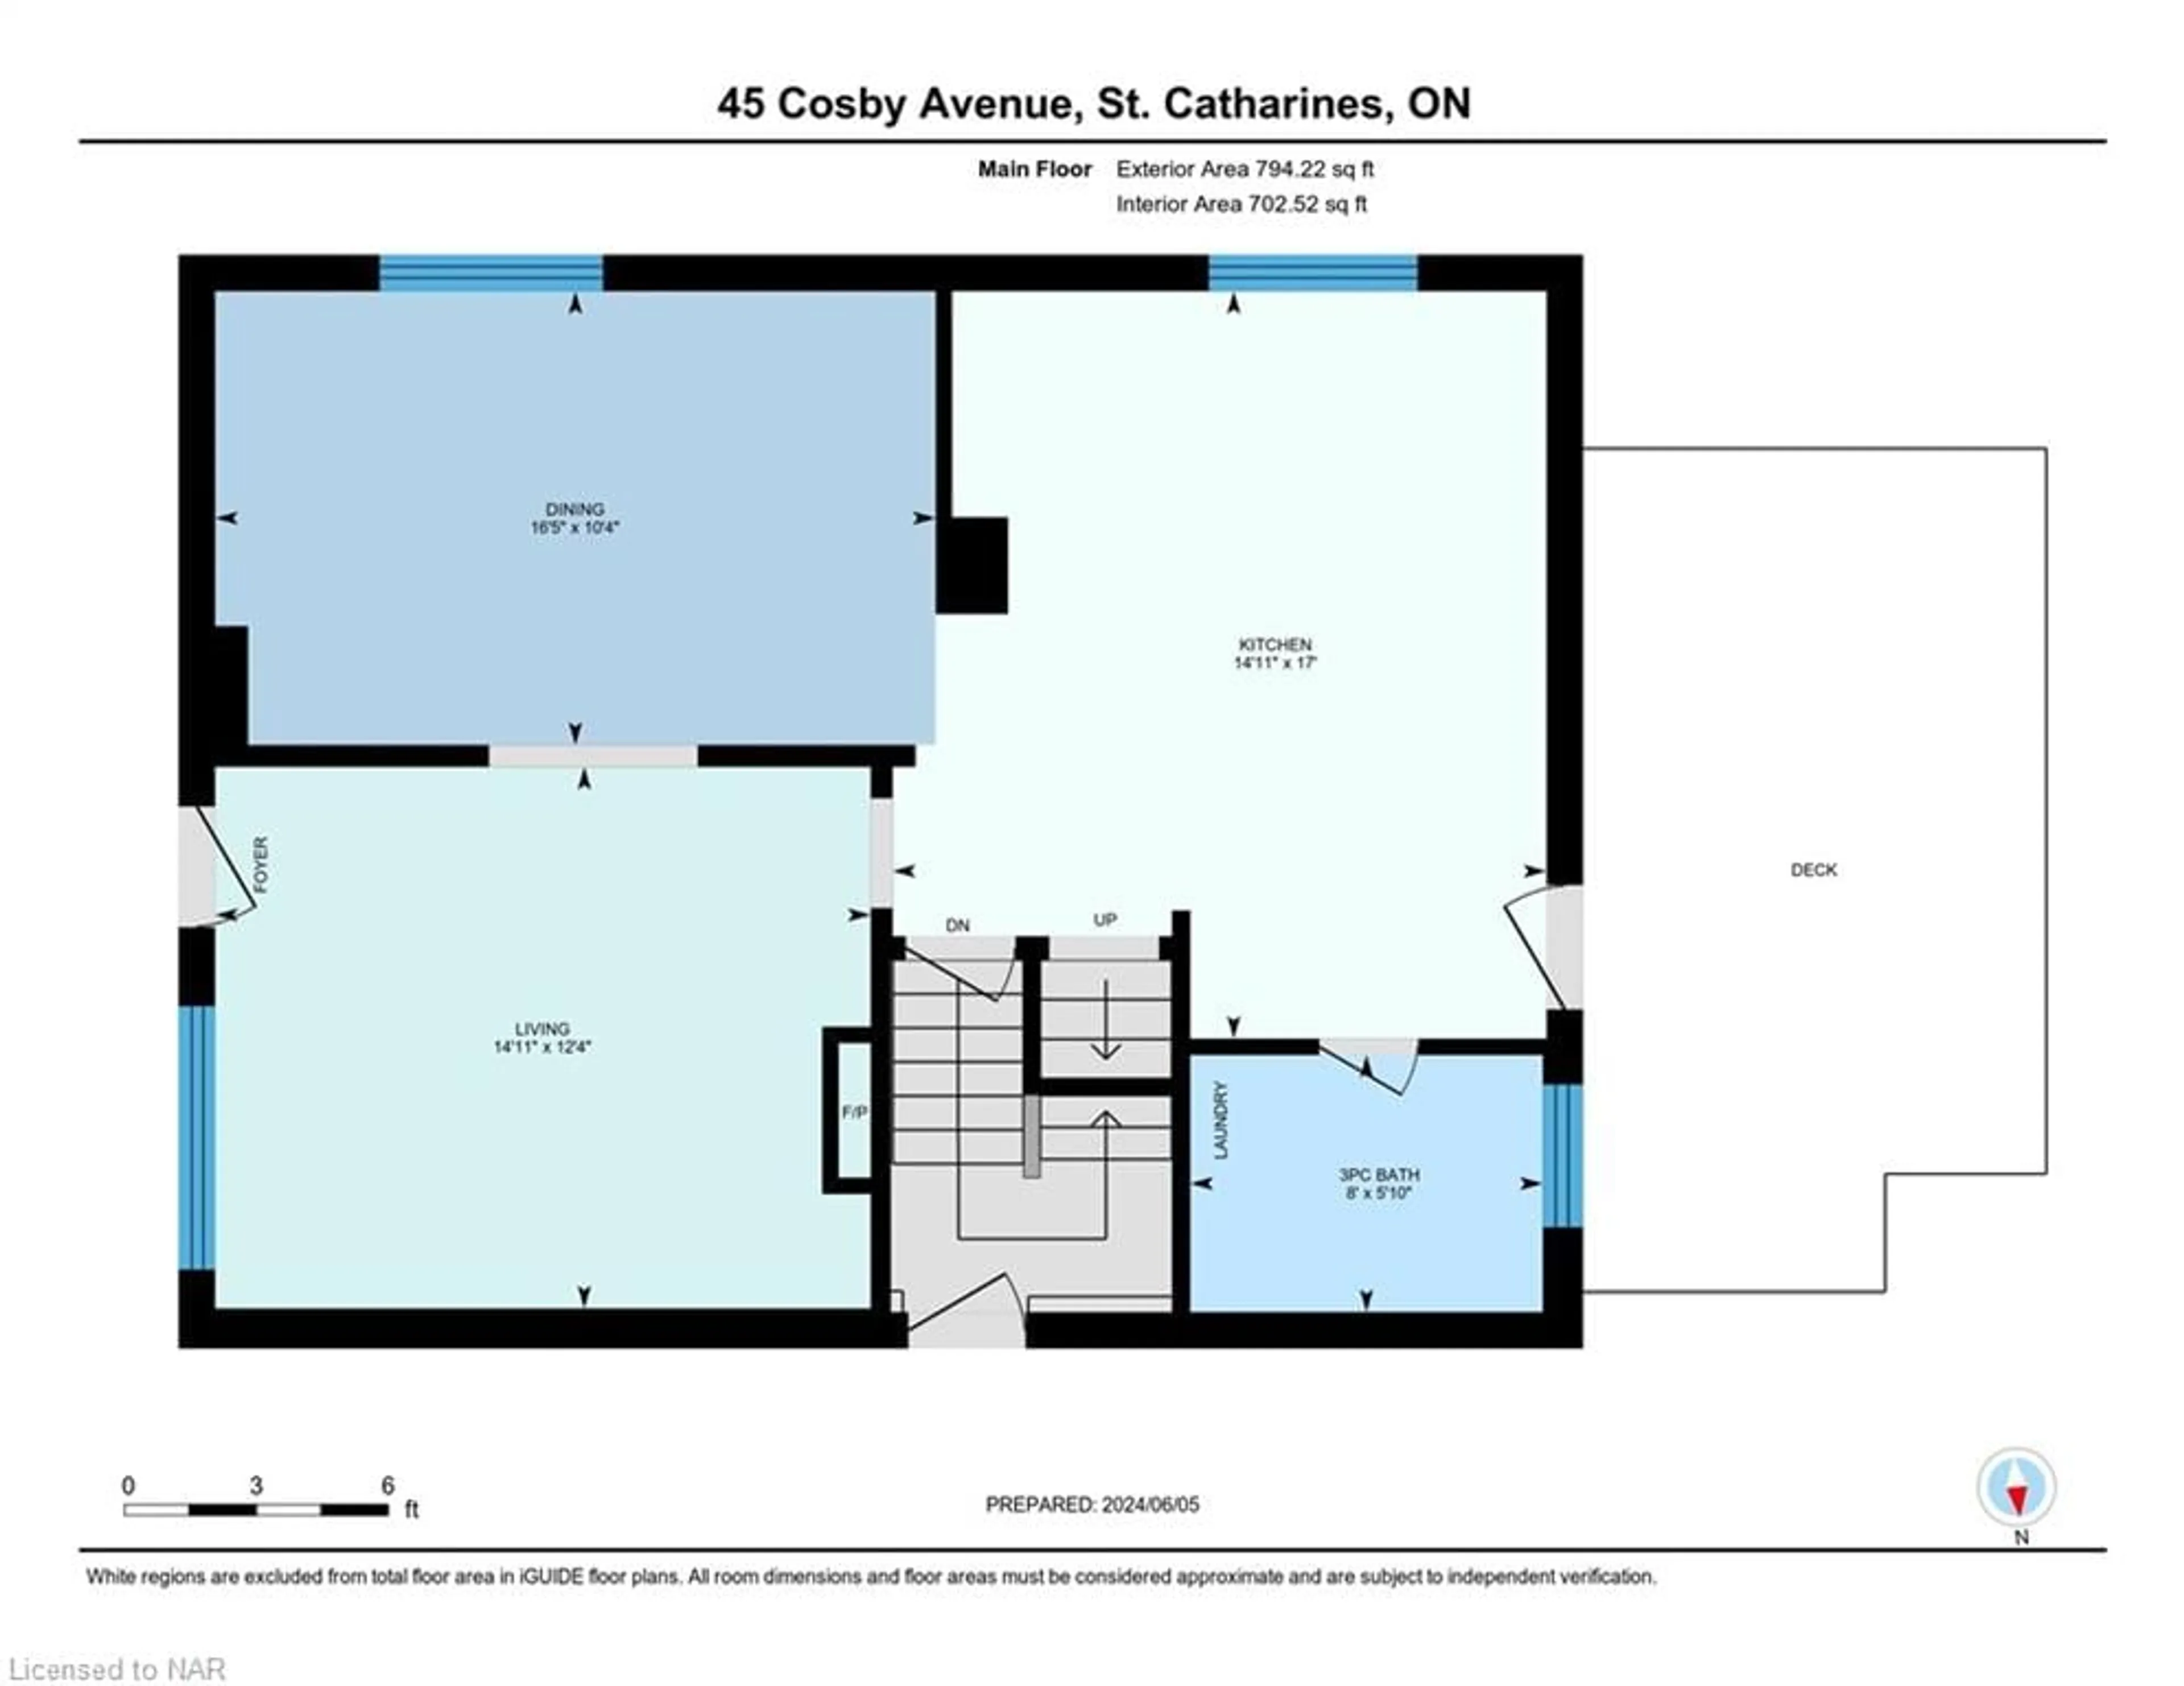 Floor plan for 45 Cosby Ave, St. Catharines Ontario L2M 5R7